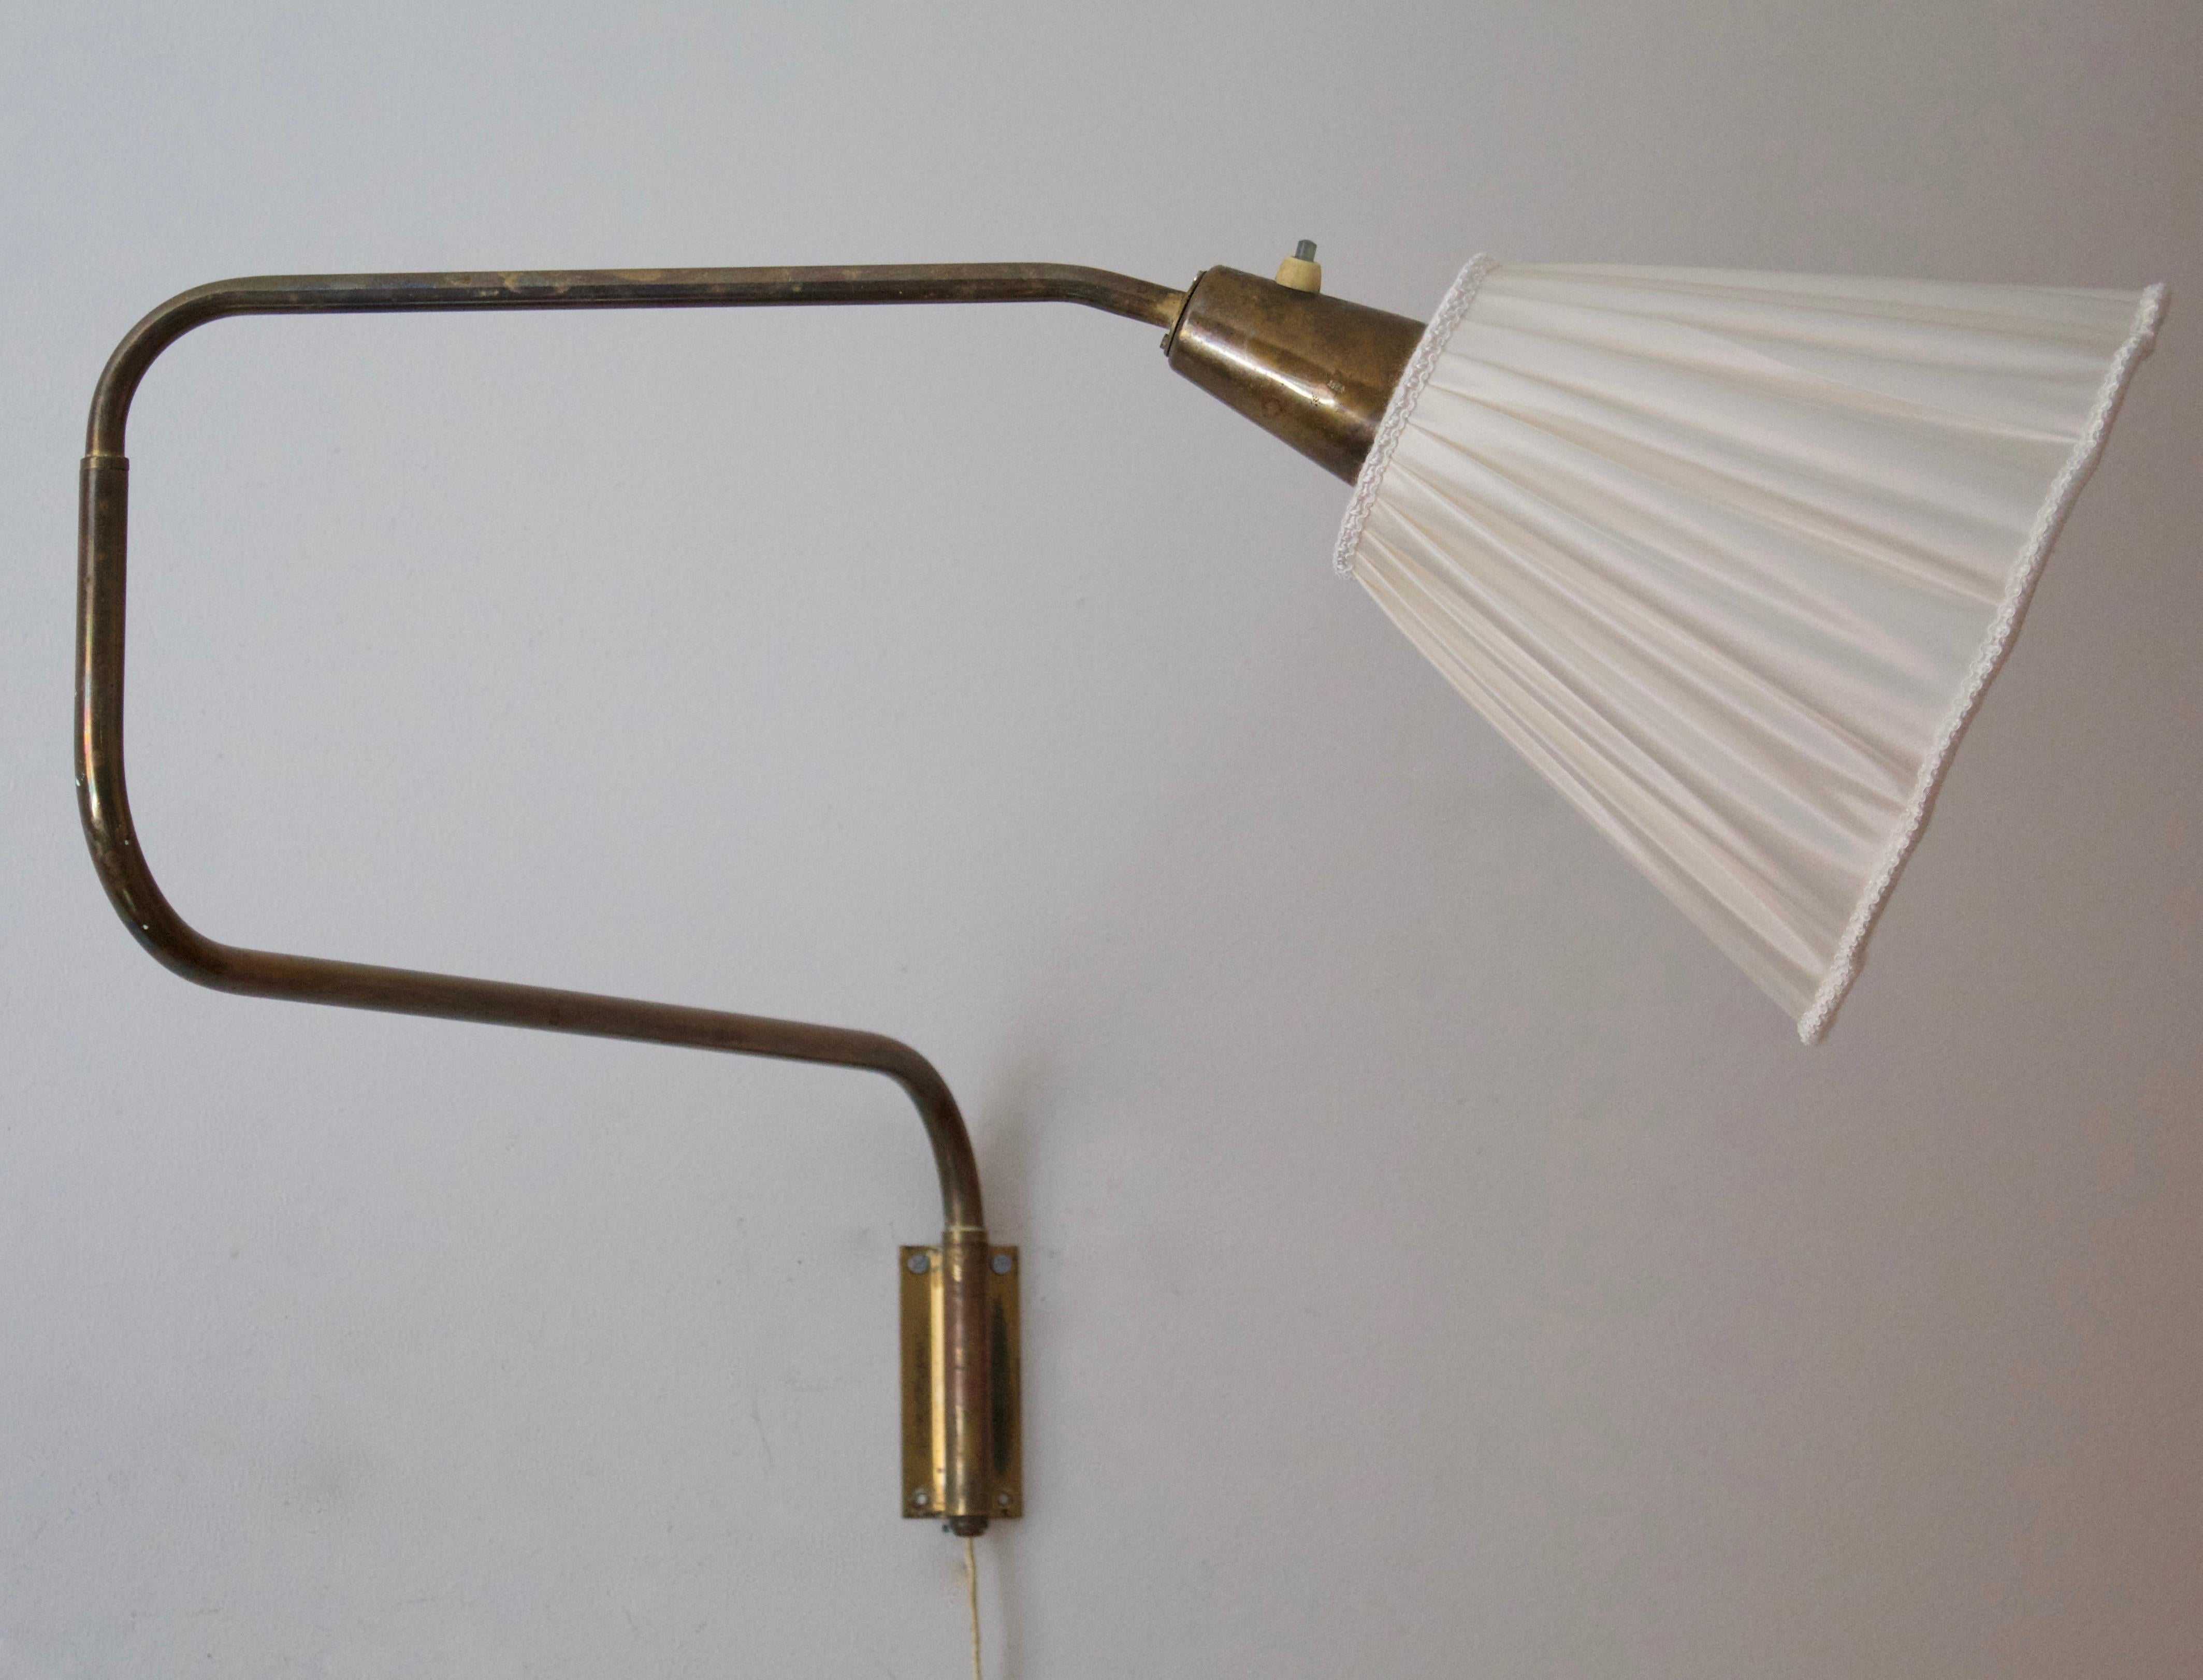 A modernist wall light, designed and produced by ASEA, Sweden, 1940s.

Features brass and a brand new high-end lampshade of period model.